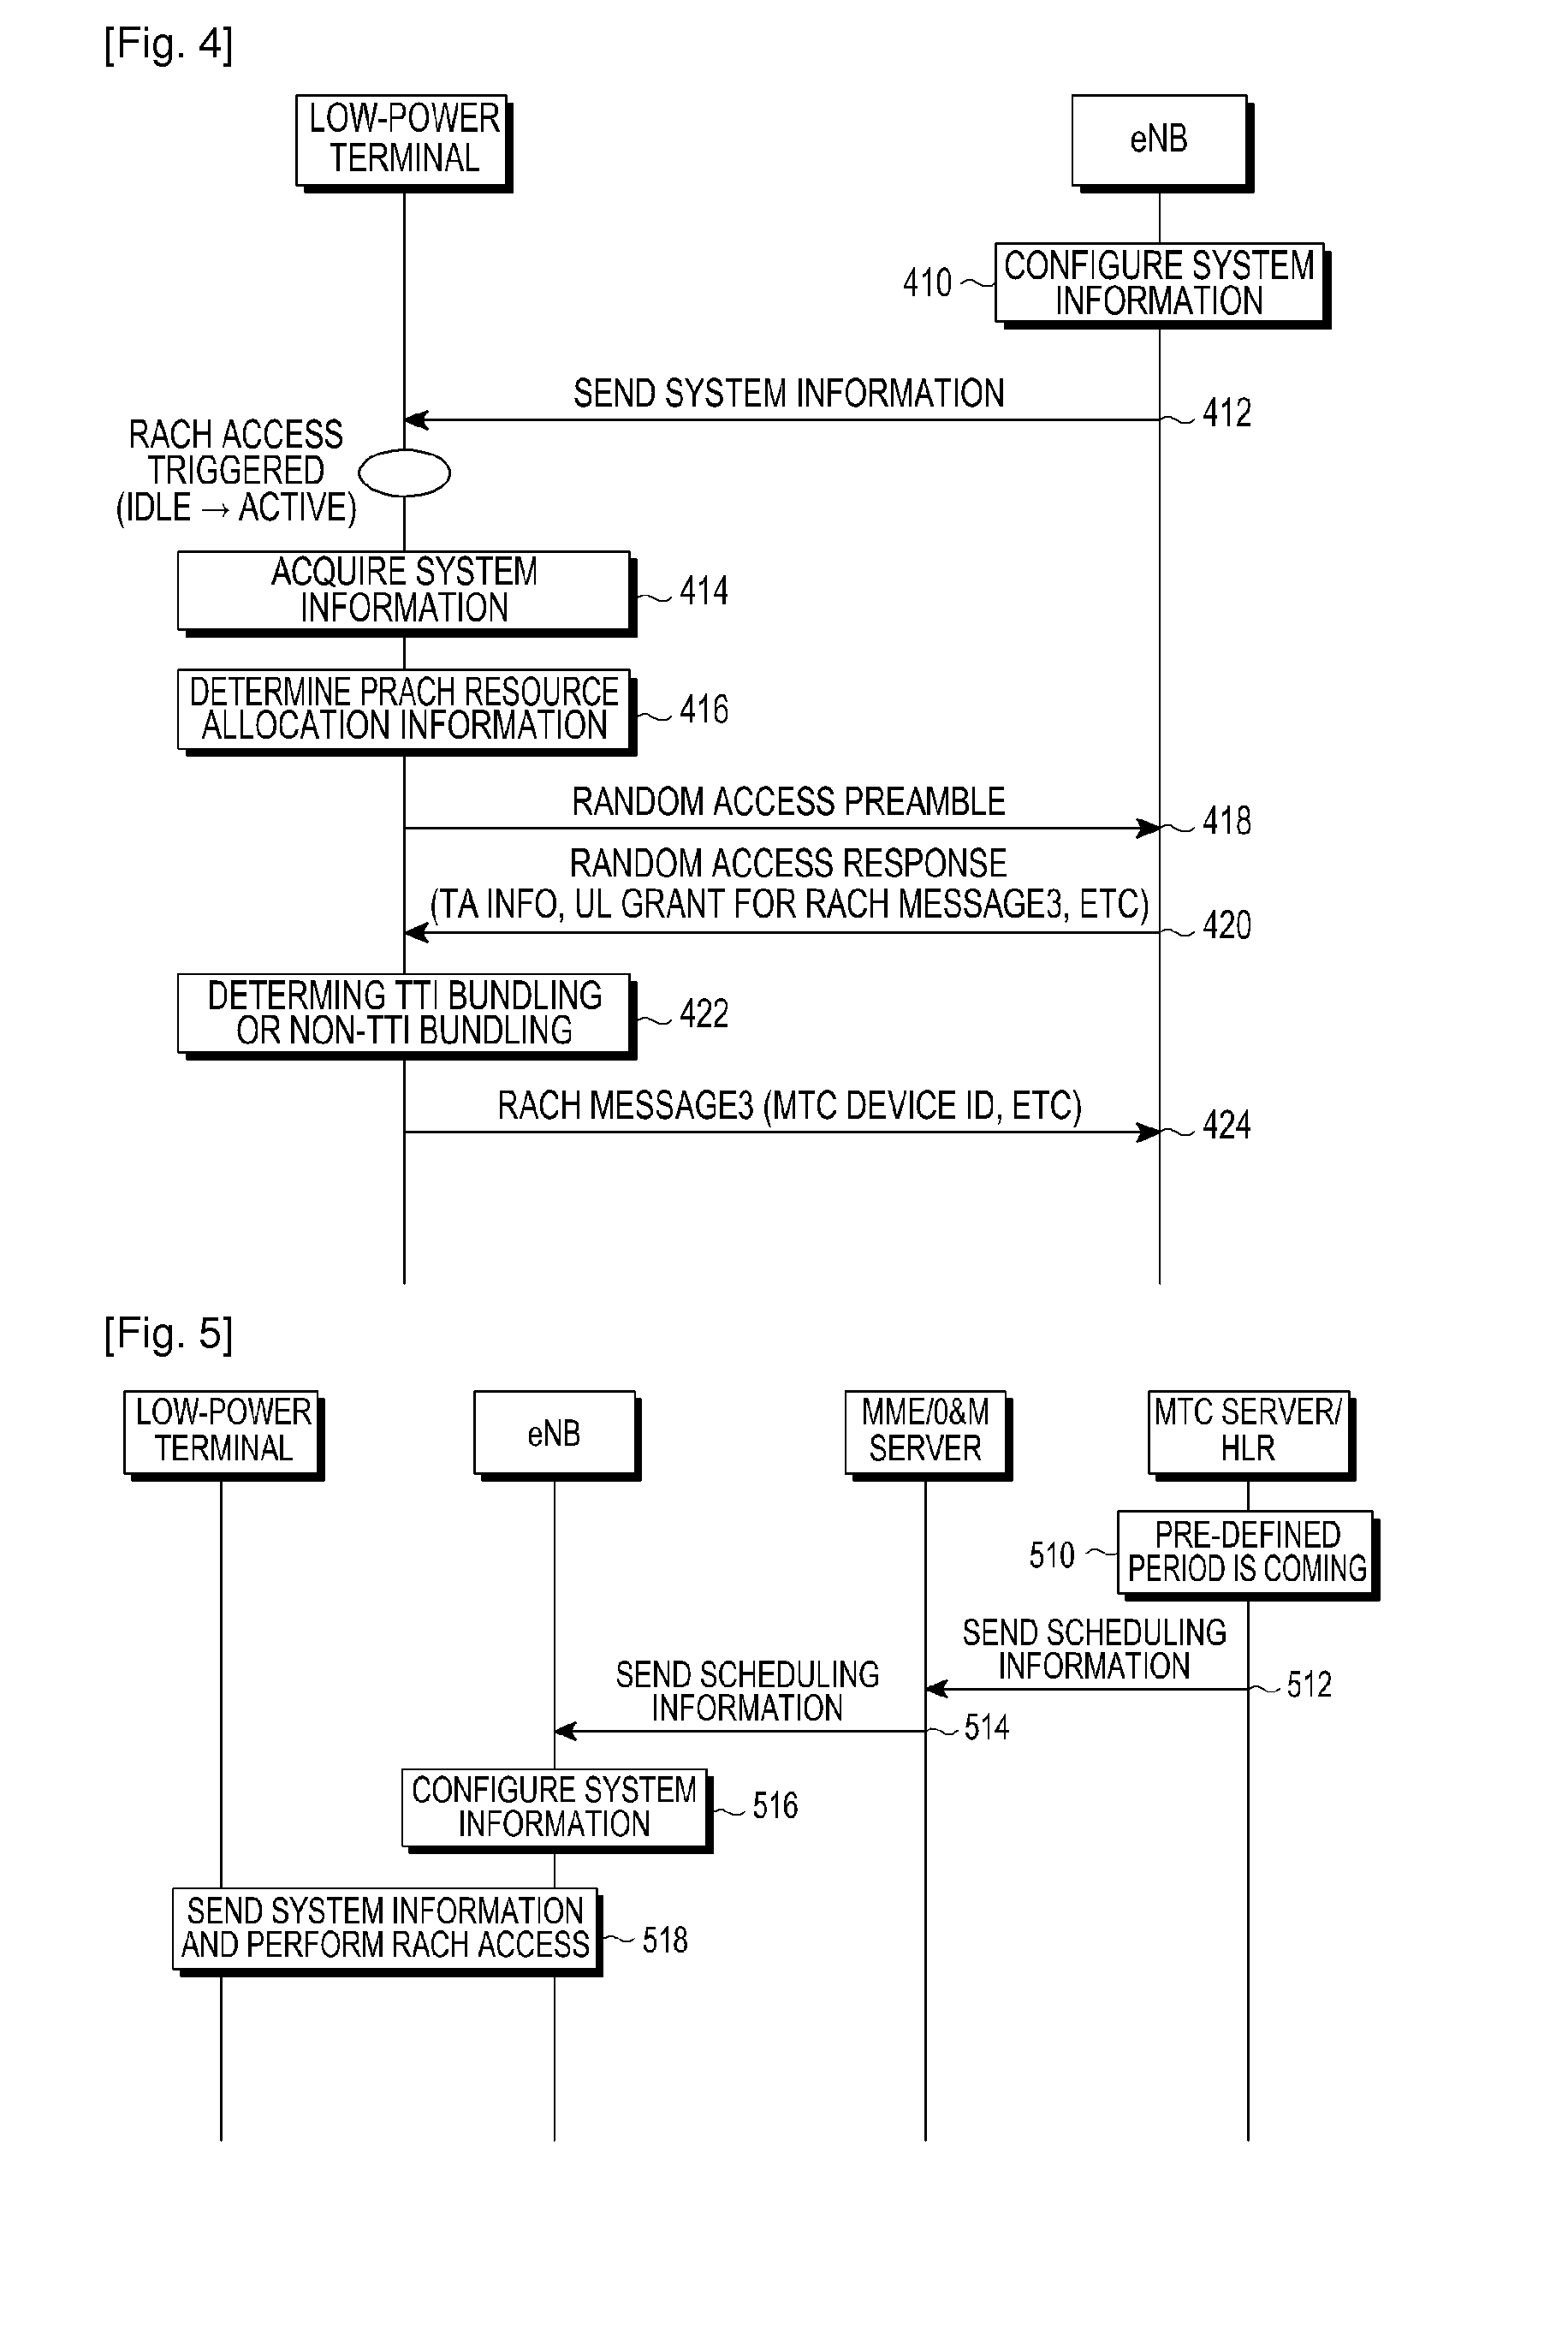 Apparatus and method for accessing random access channel in a wireless communication system